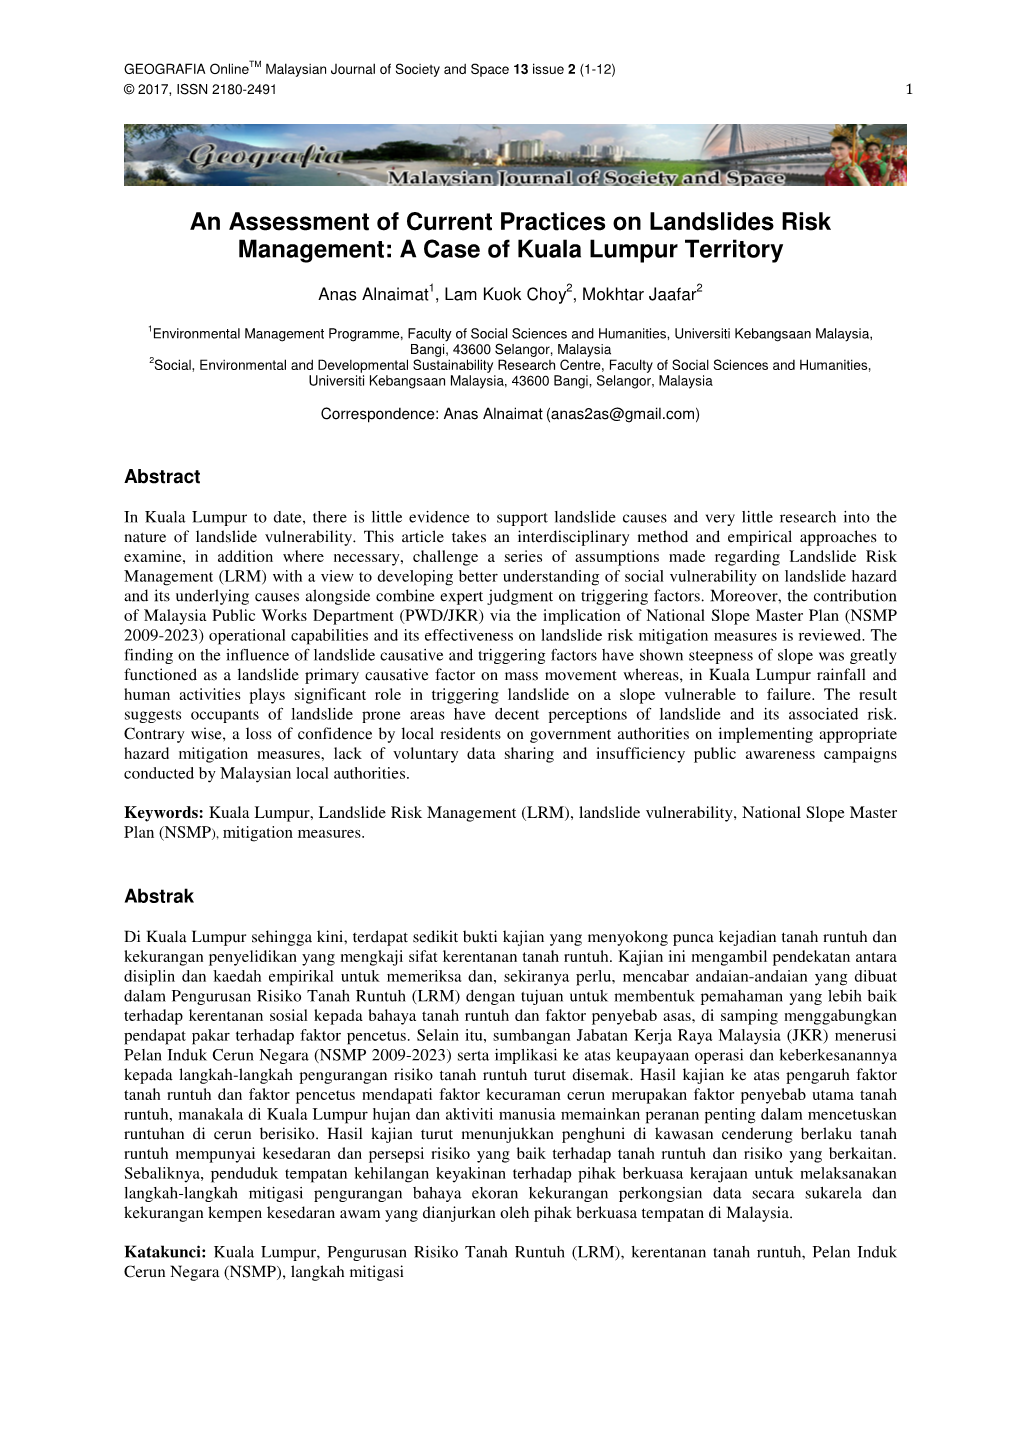 An Assessment of Current Practices on Landslides Risk Management: a Case of Kuala Lumpur Territory